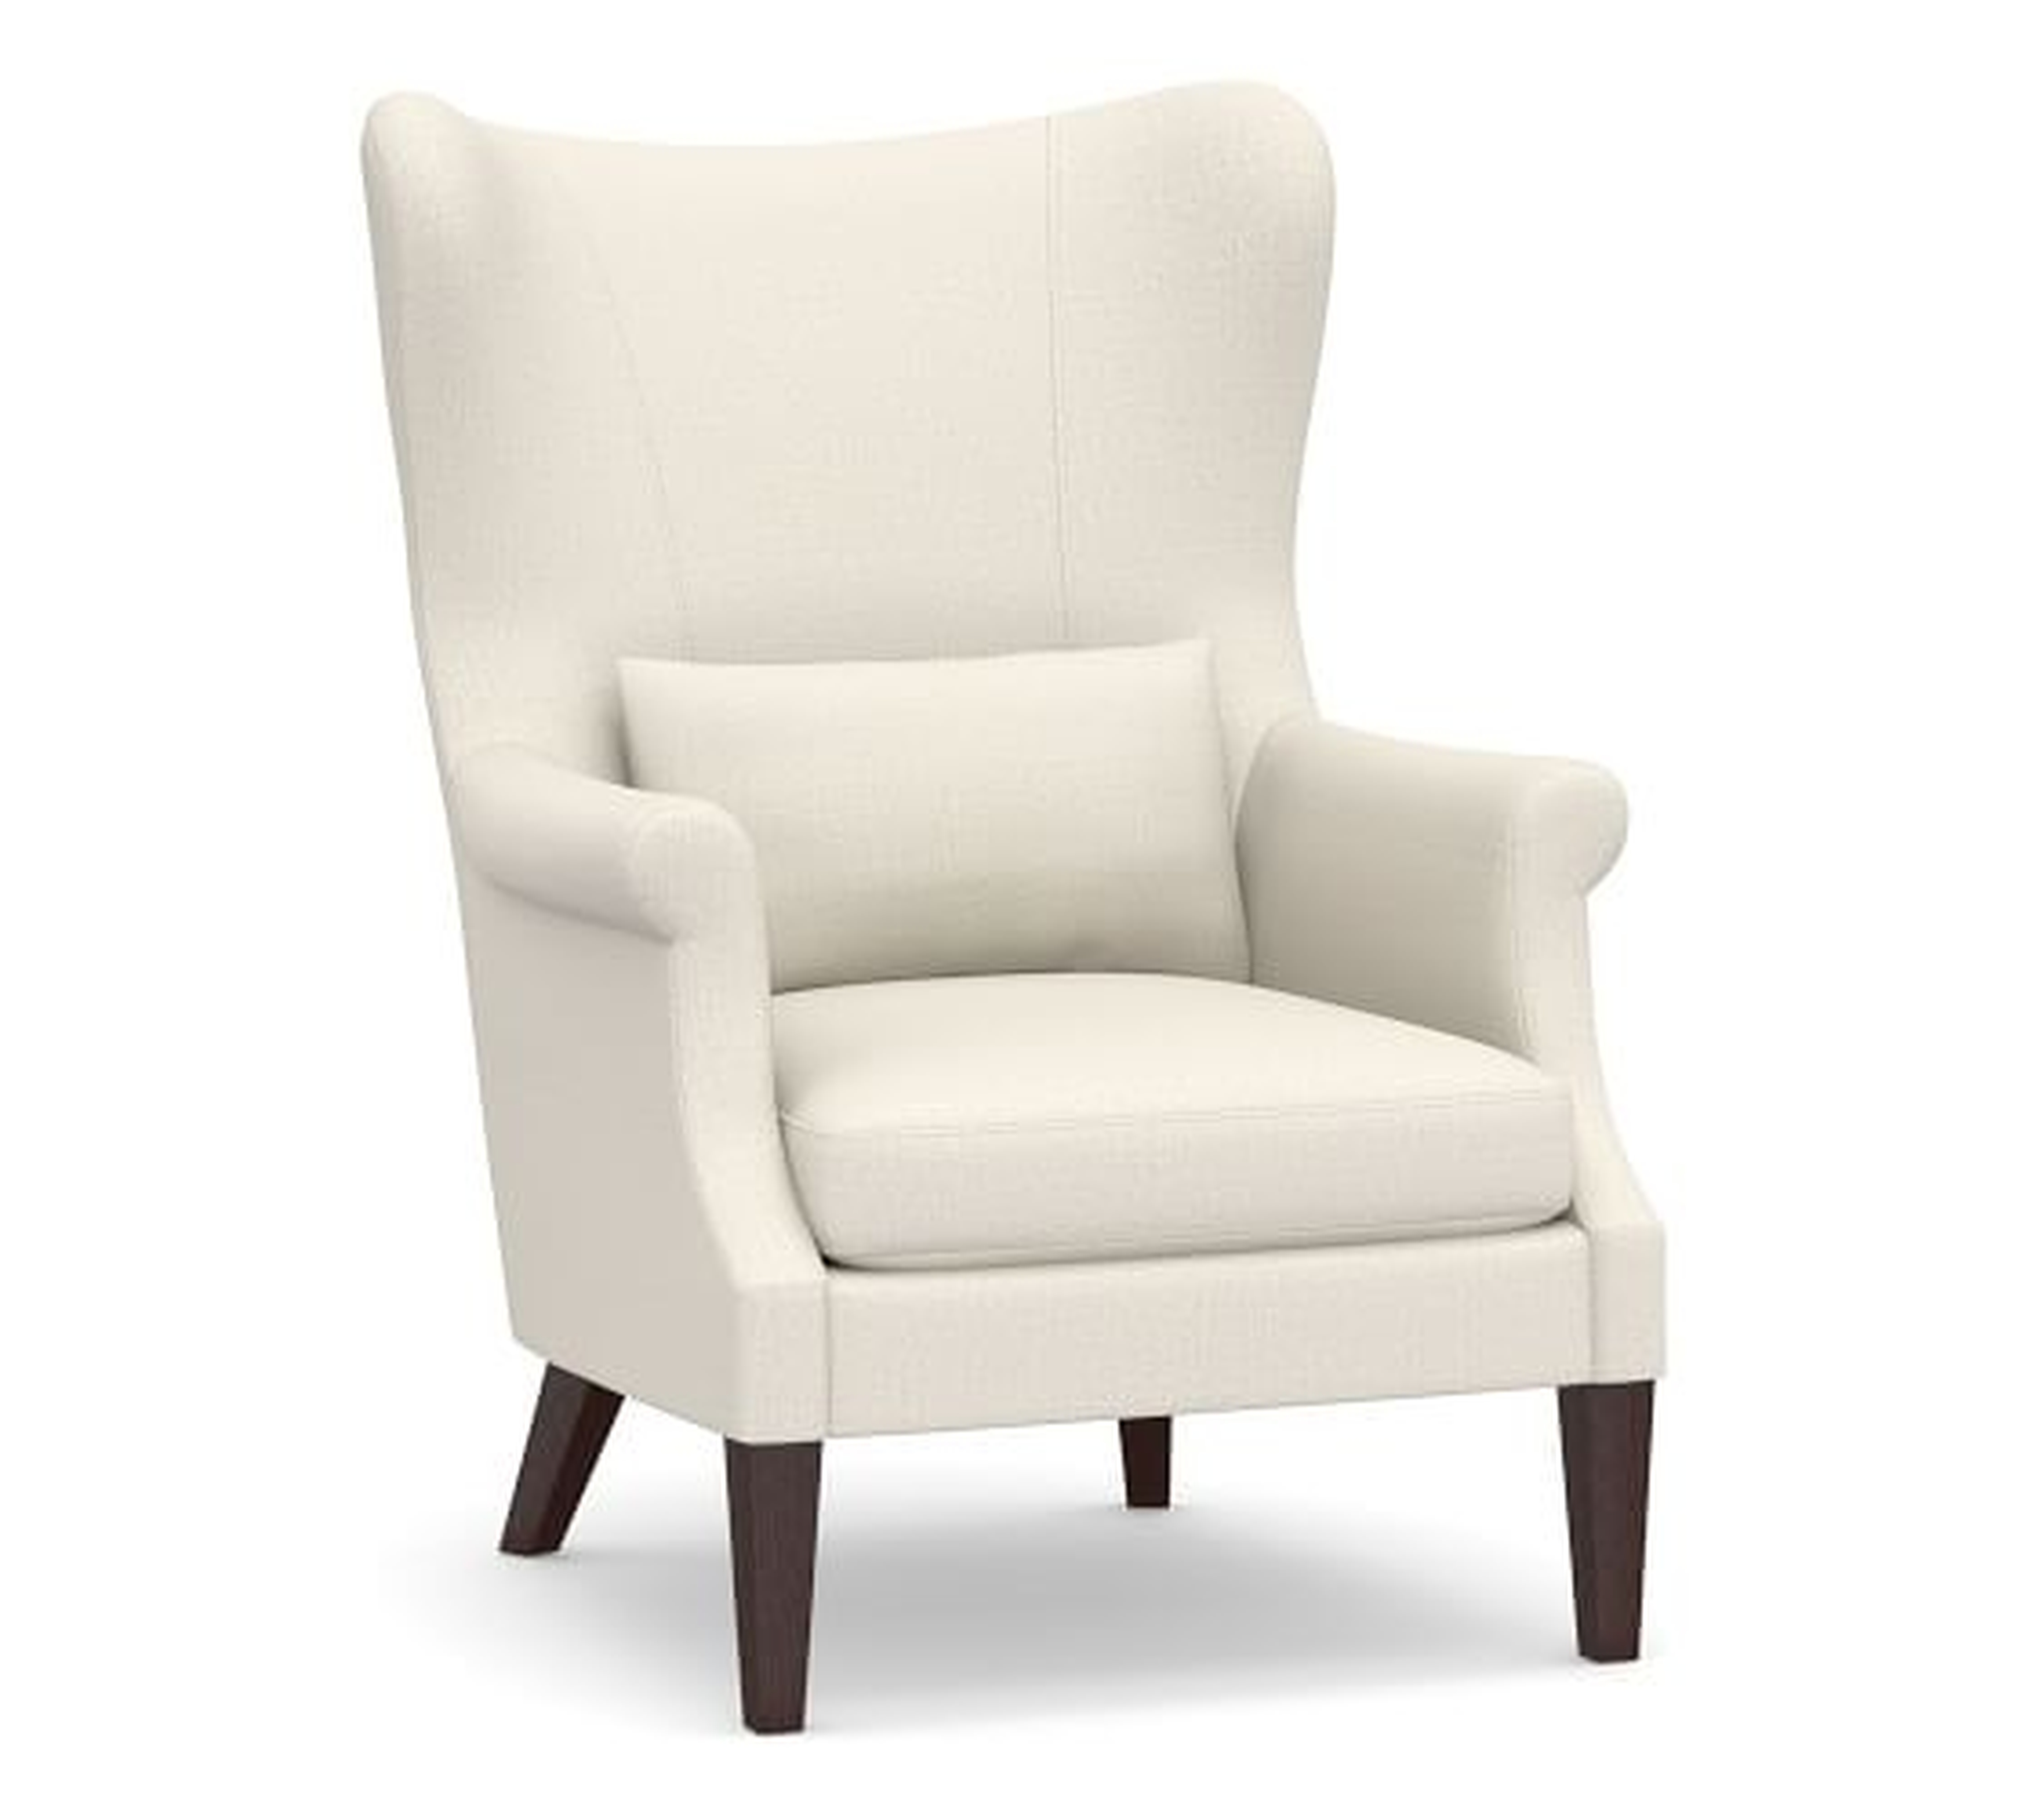 Champlain Upholstered Wingback Armchair, Polyester Wrapped Cushions, Performance Heathered Tweed Ivory - Pottery Barn